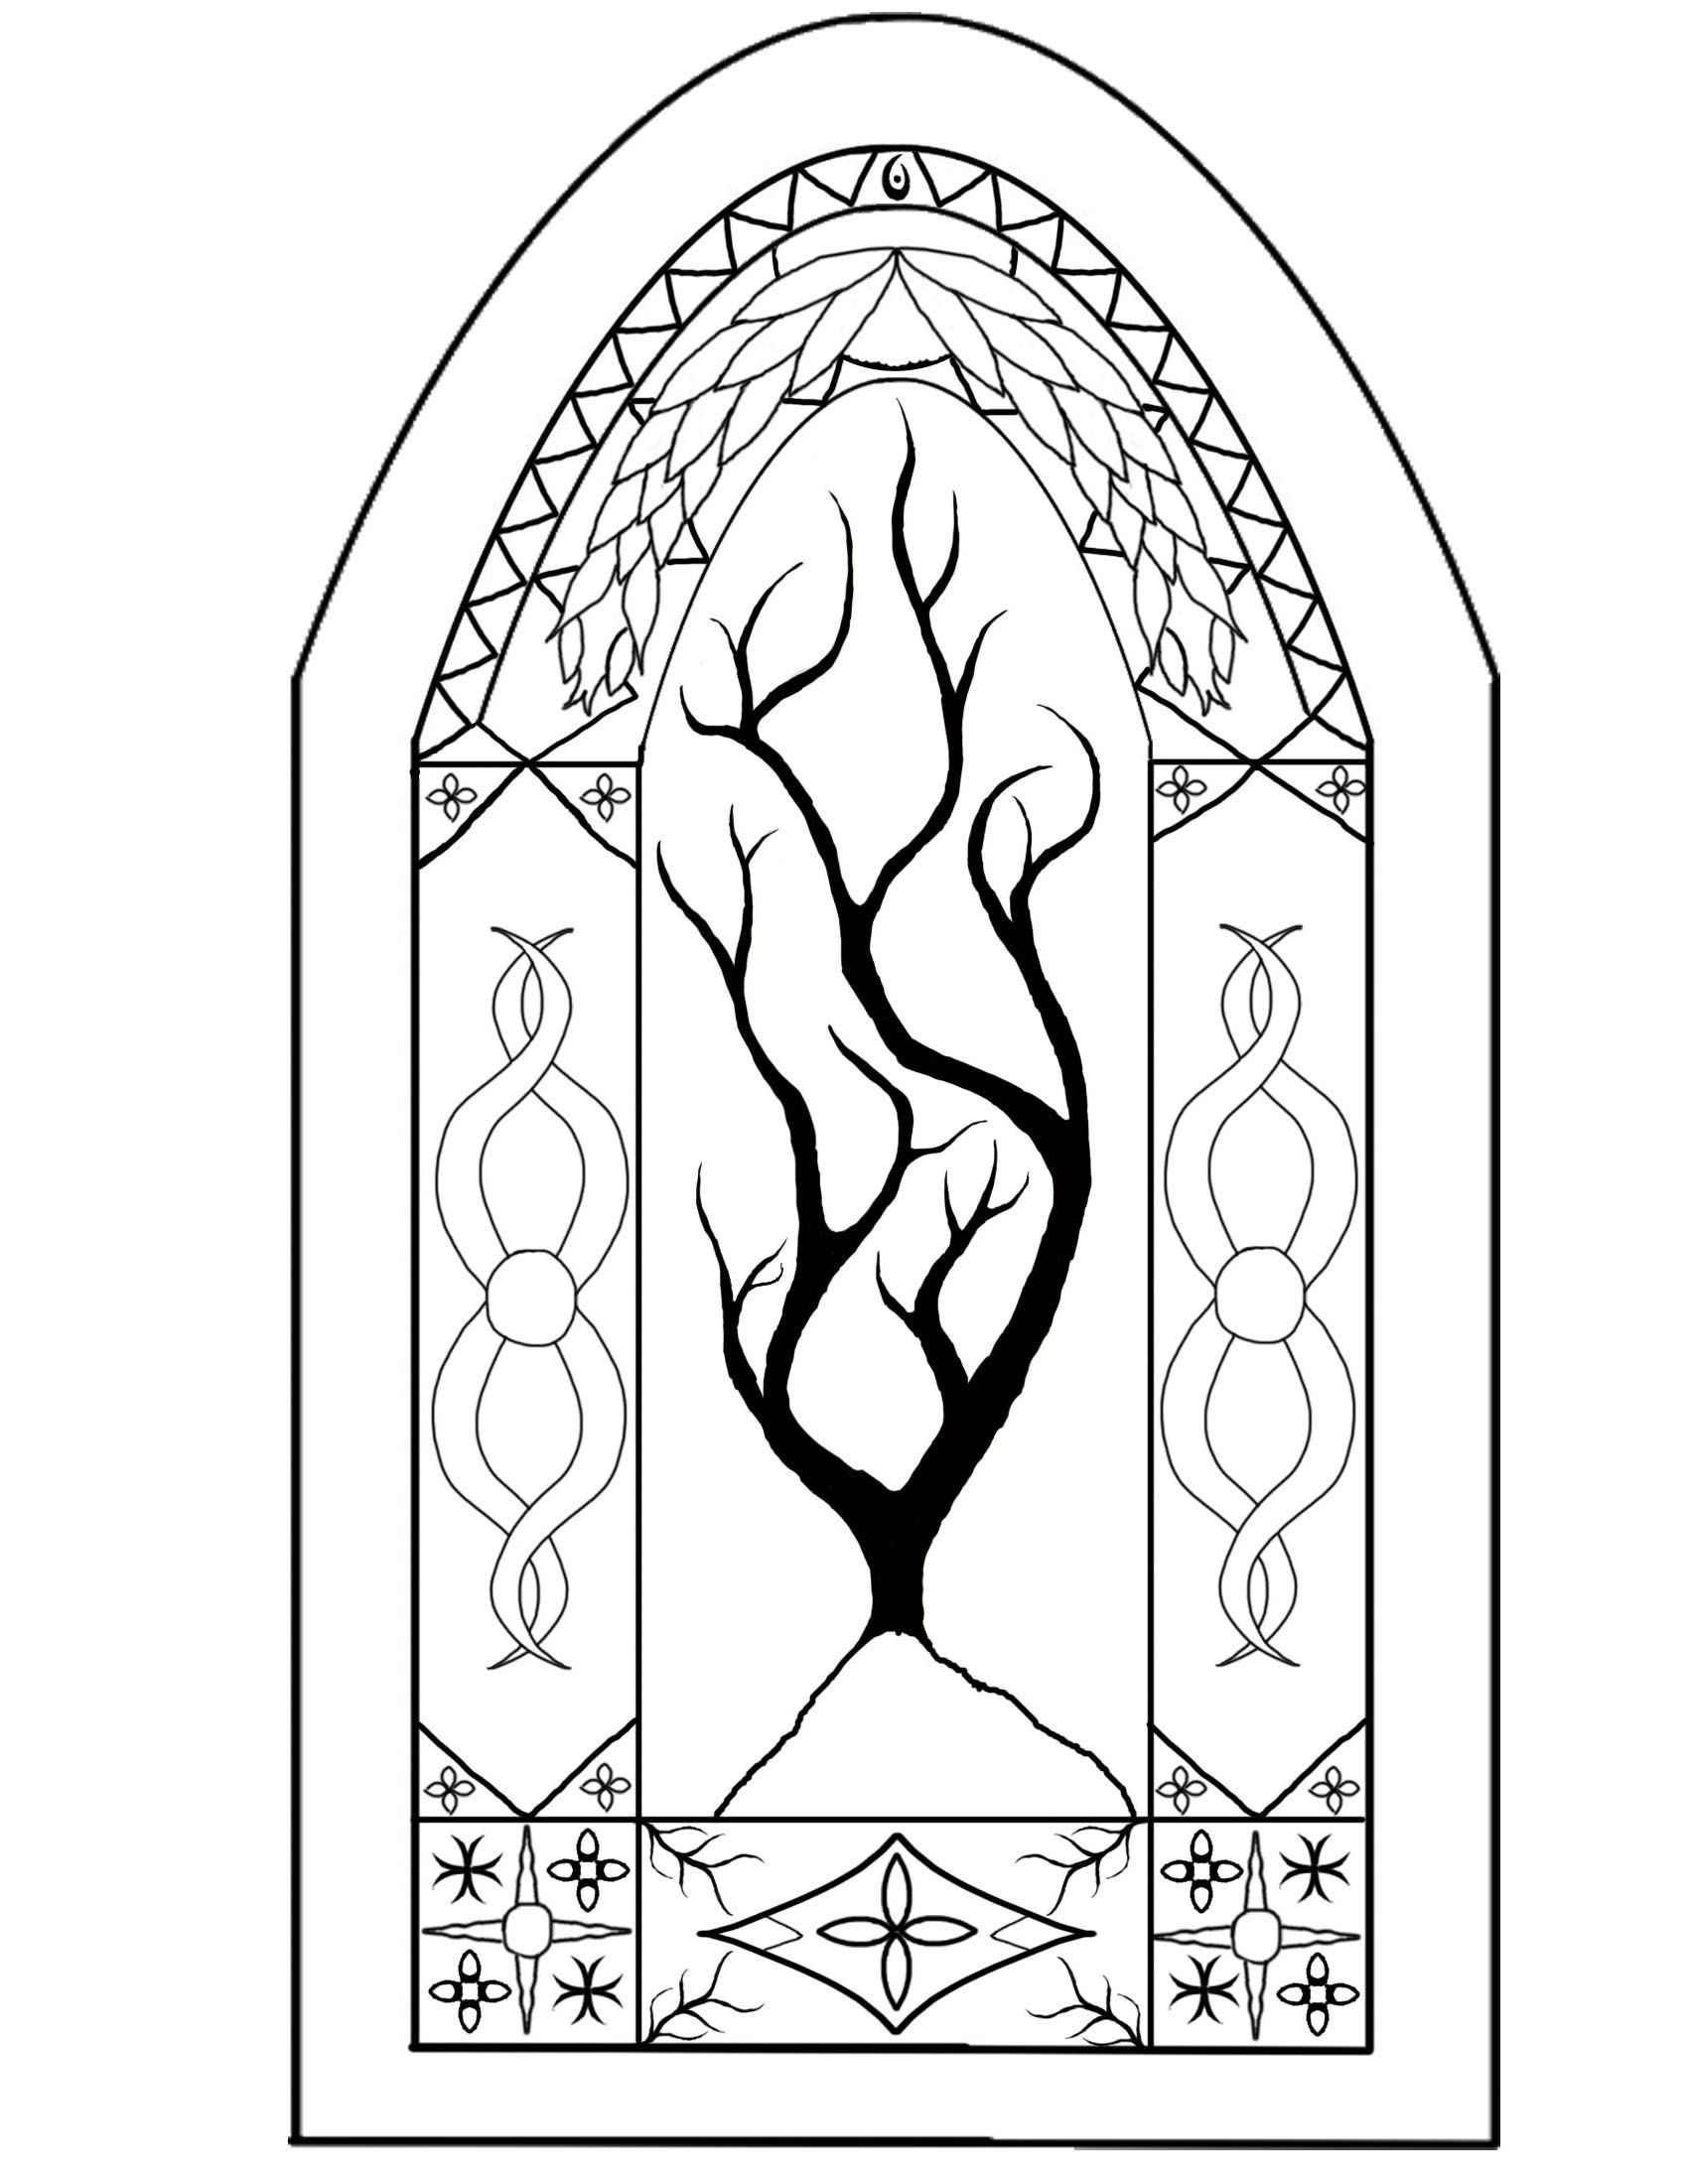 Stained Glass Window Pictures To Color - Coloring Pages for Kids ...